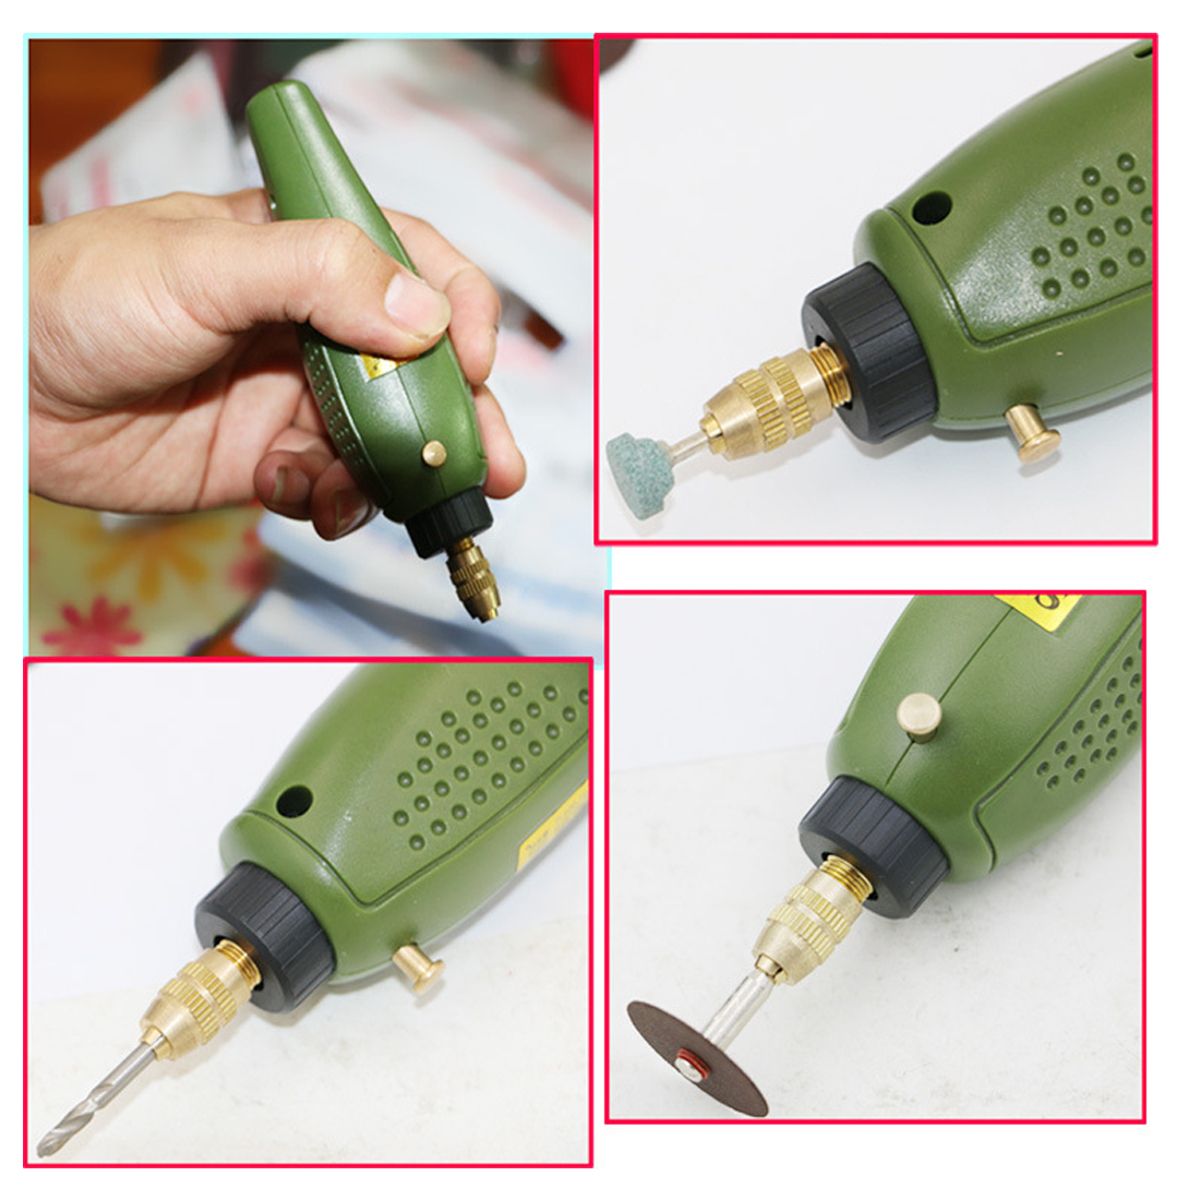 Mini-Engraving-Pen-Electric-Engraver-Carve-Wood-Chisel-Carving-Tools-Metals-Glass-Jewelery-1286587